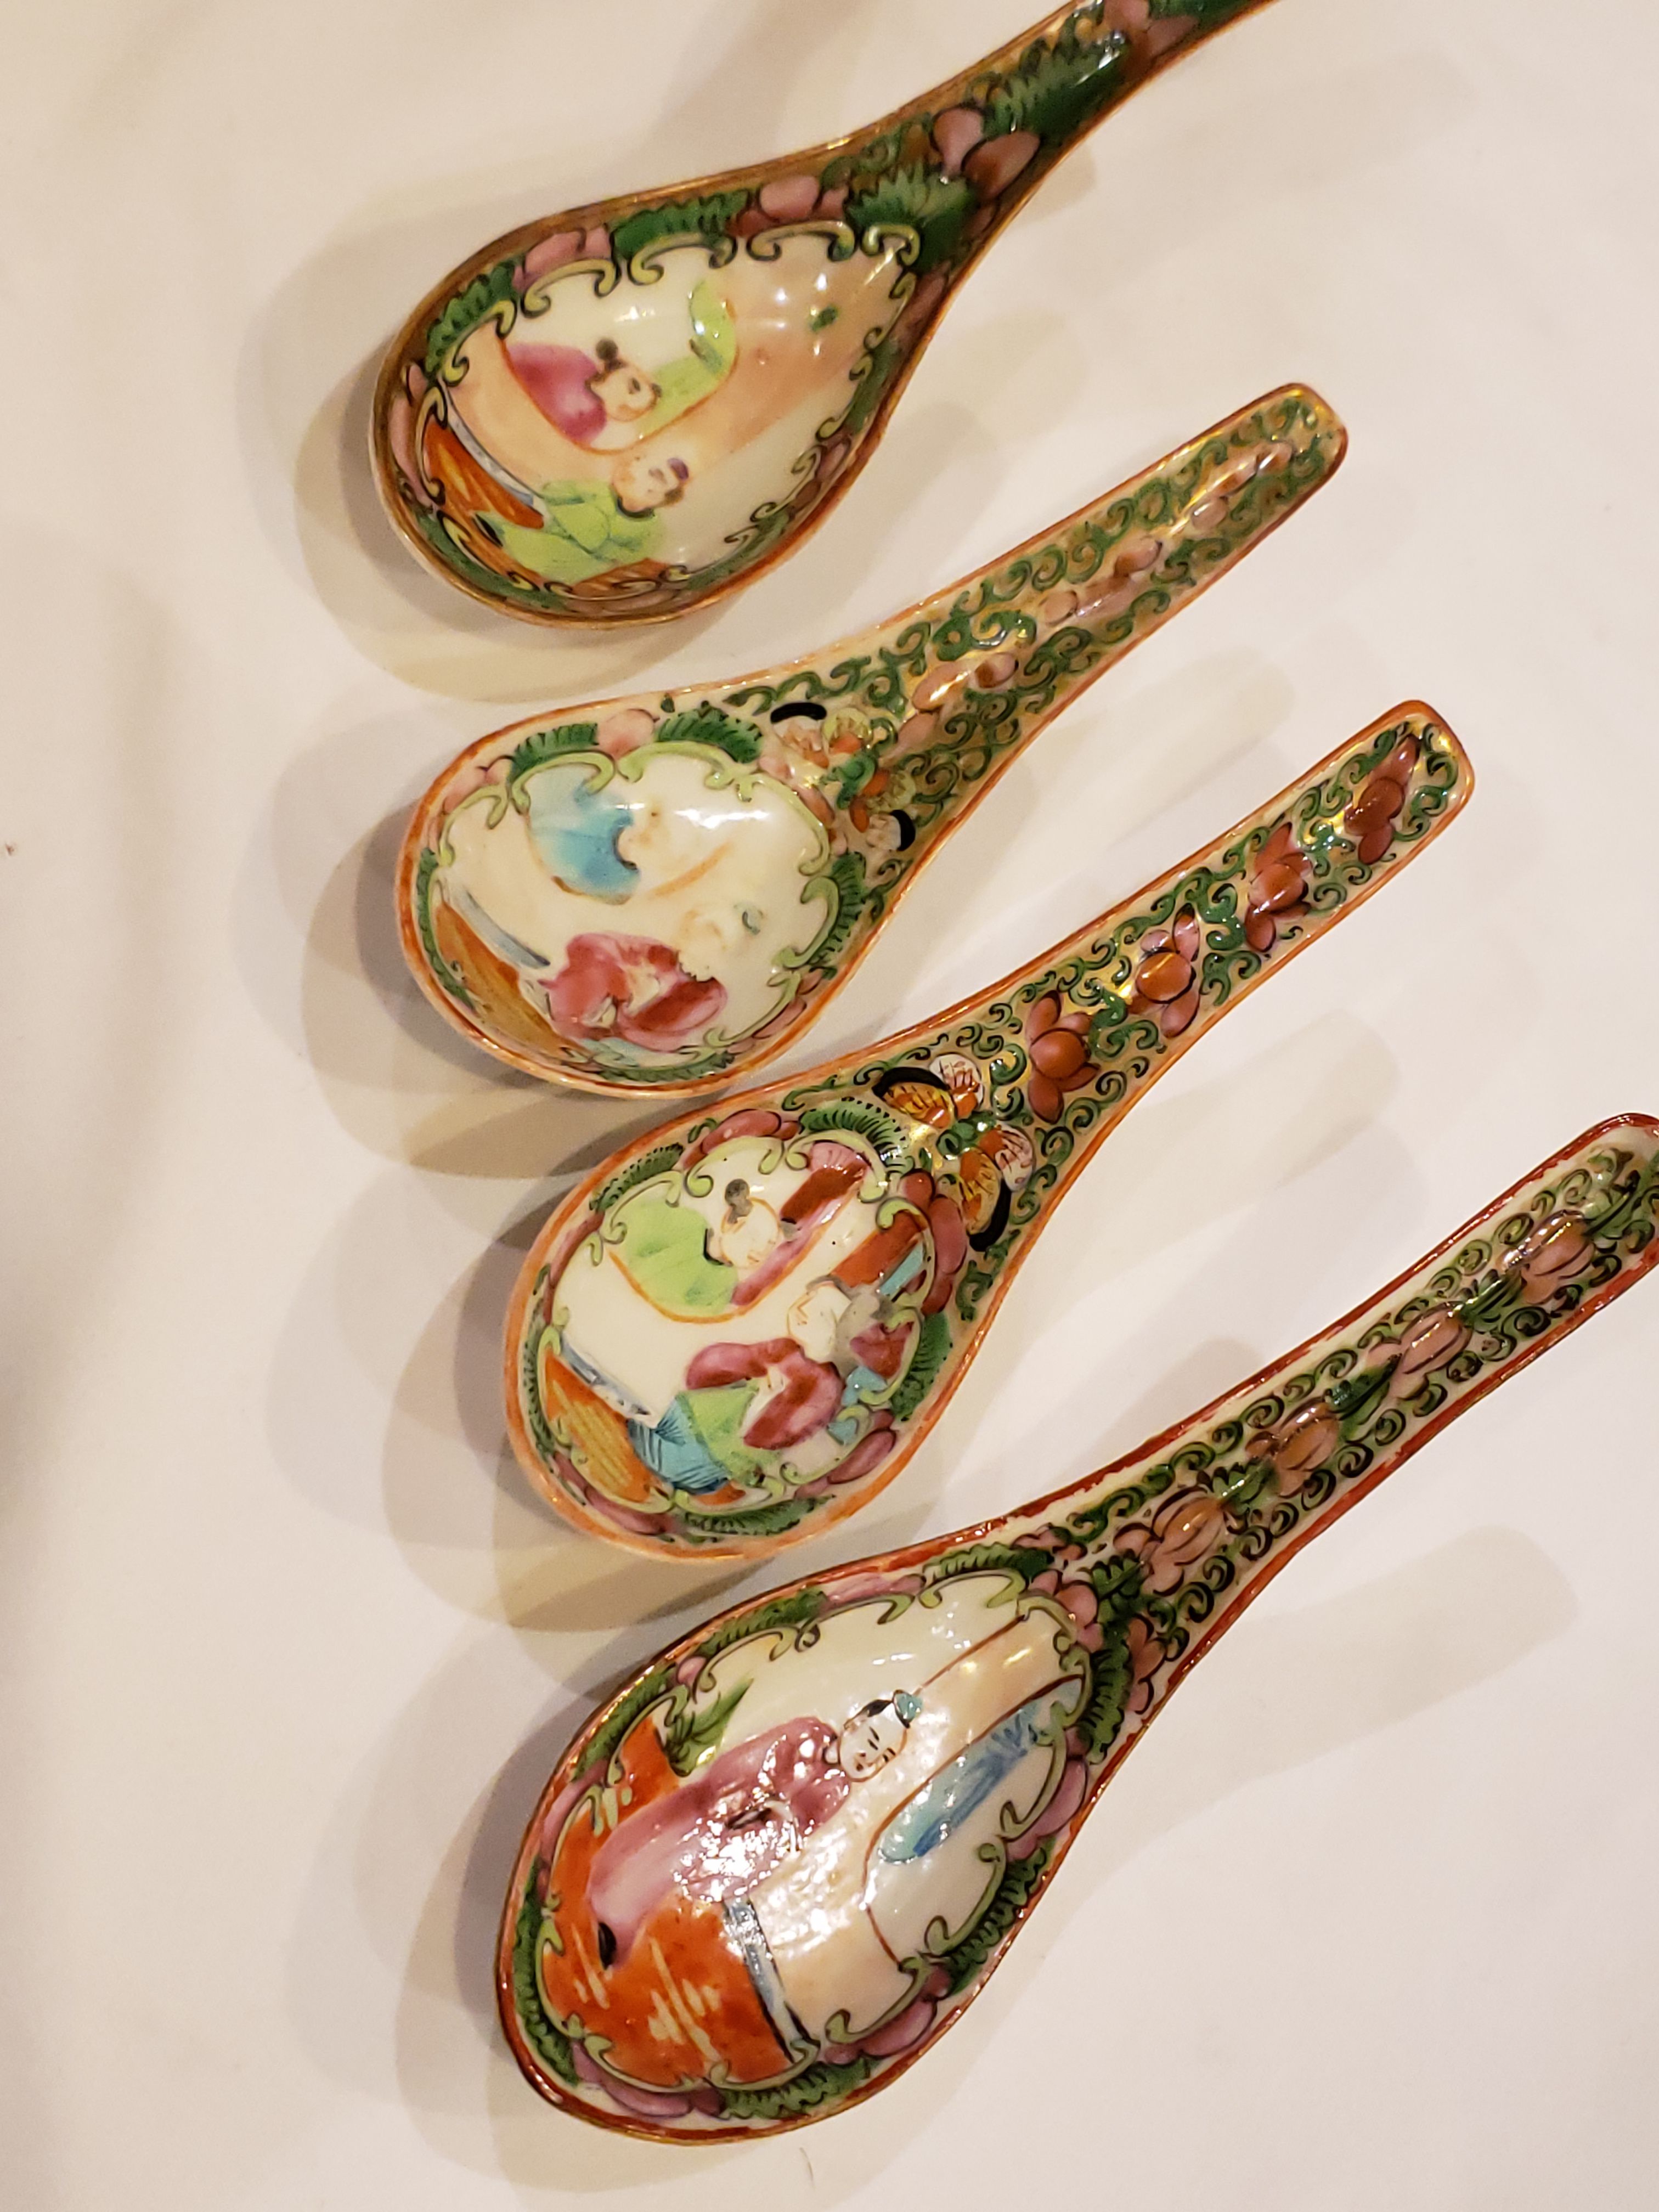 Lot of 4 Antique Chinese Export Porcelain Famille Rose Soup Spoons